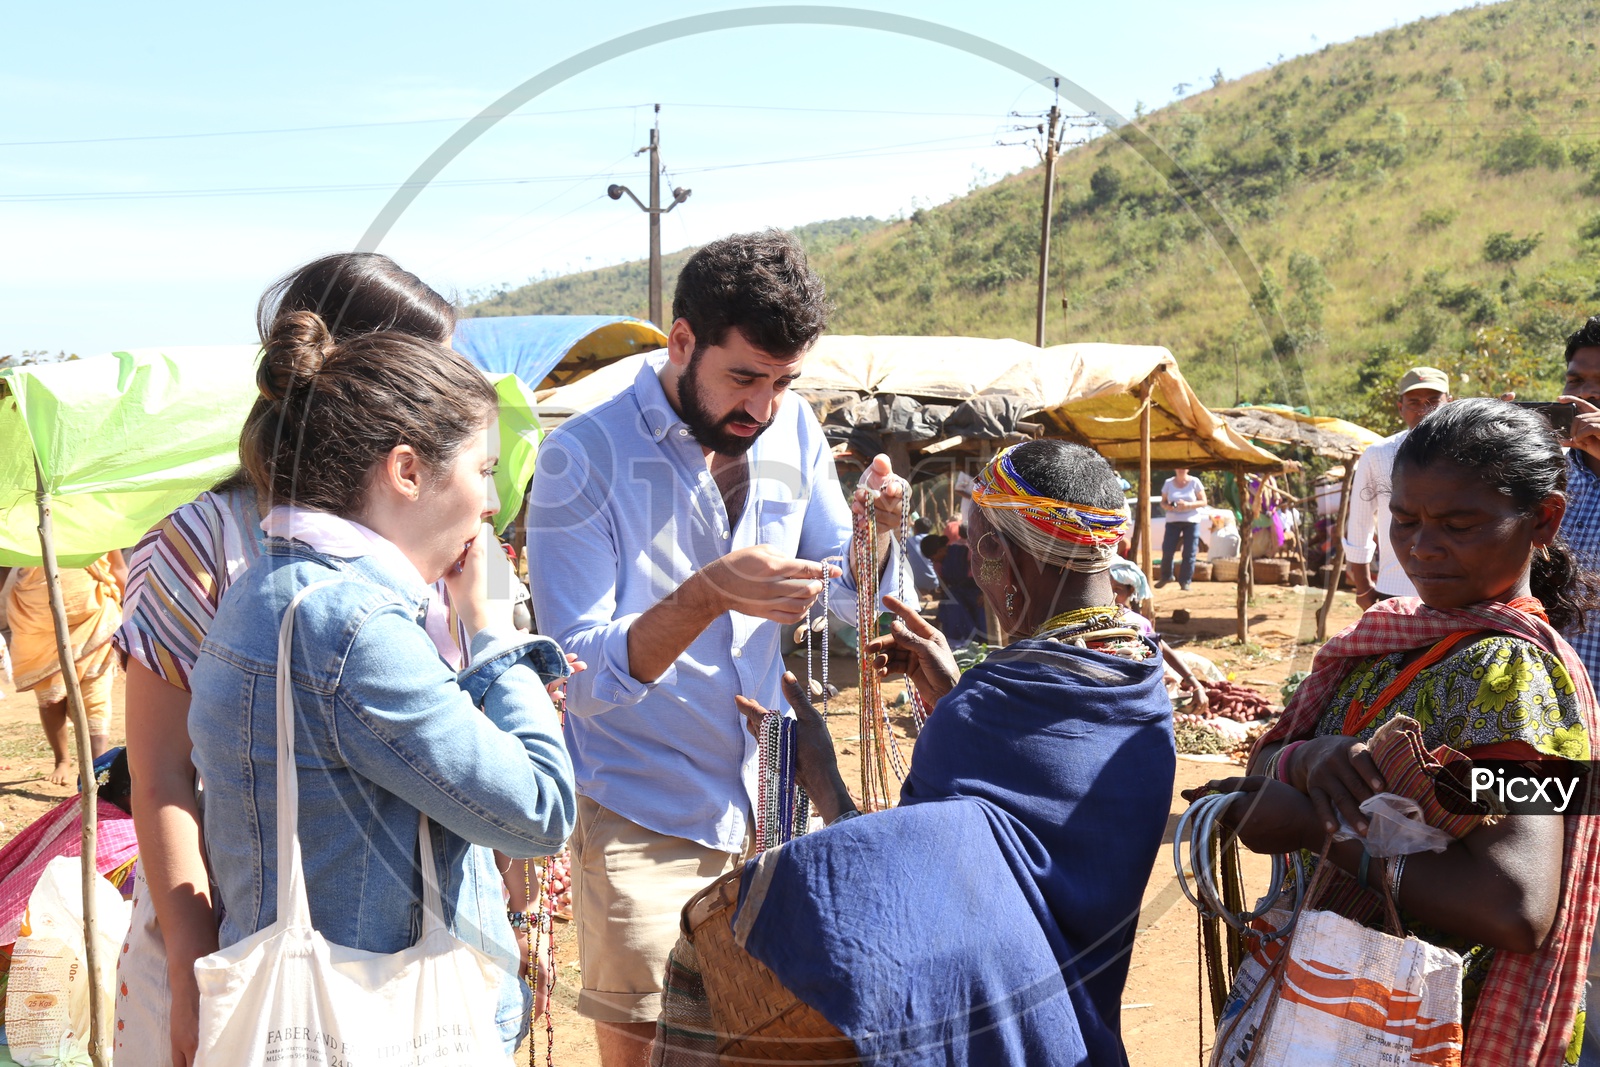 Foreigners Or tourists Purchasing Handmade Art Crafts  From Bonda Tribal Woman In tribal Village flea Market